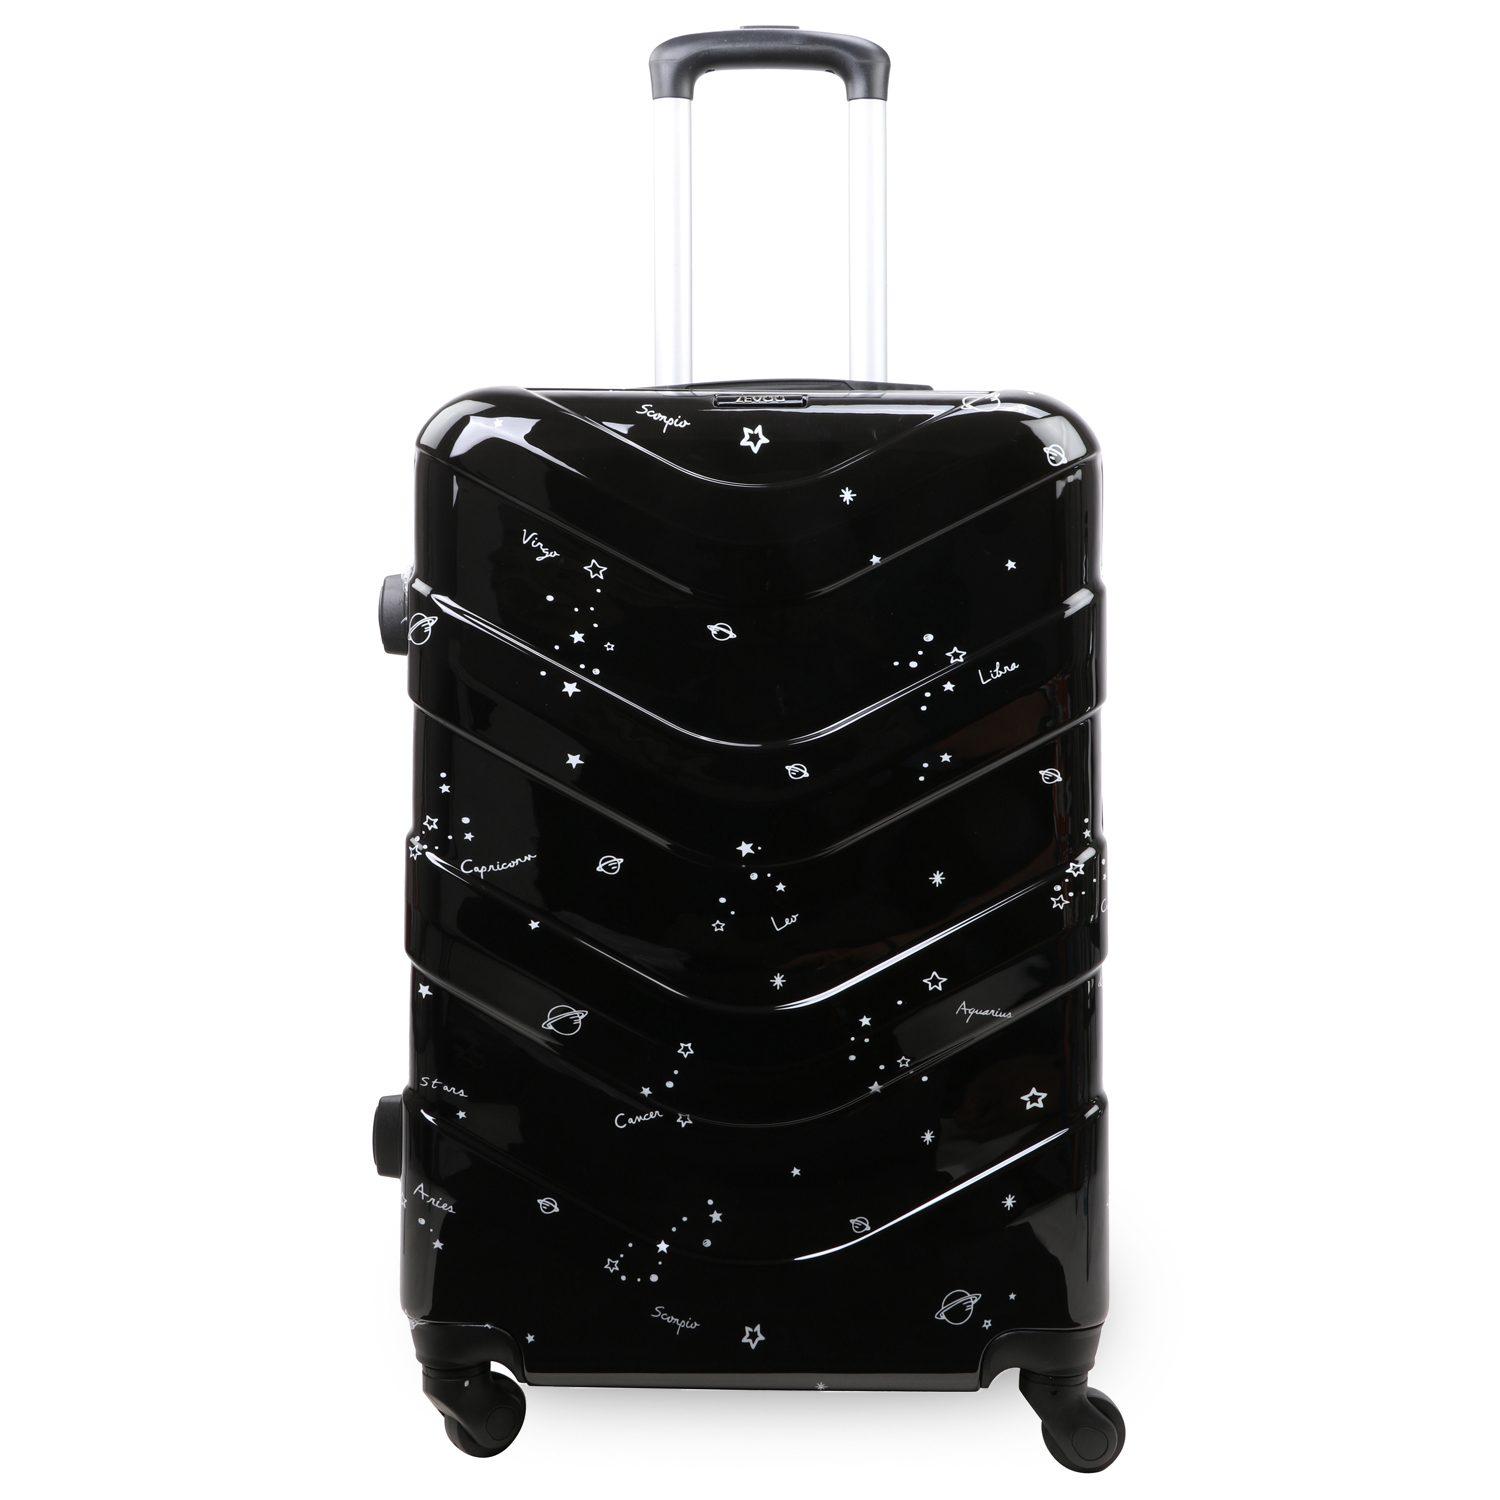 ZEVOG Lucky Bag Check in Luggage Black color 24 Inch 0759108943213